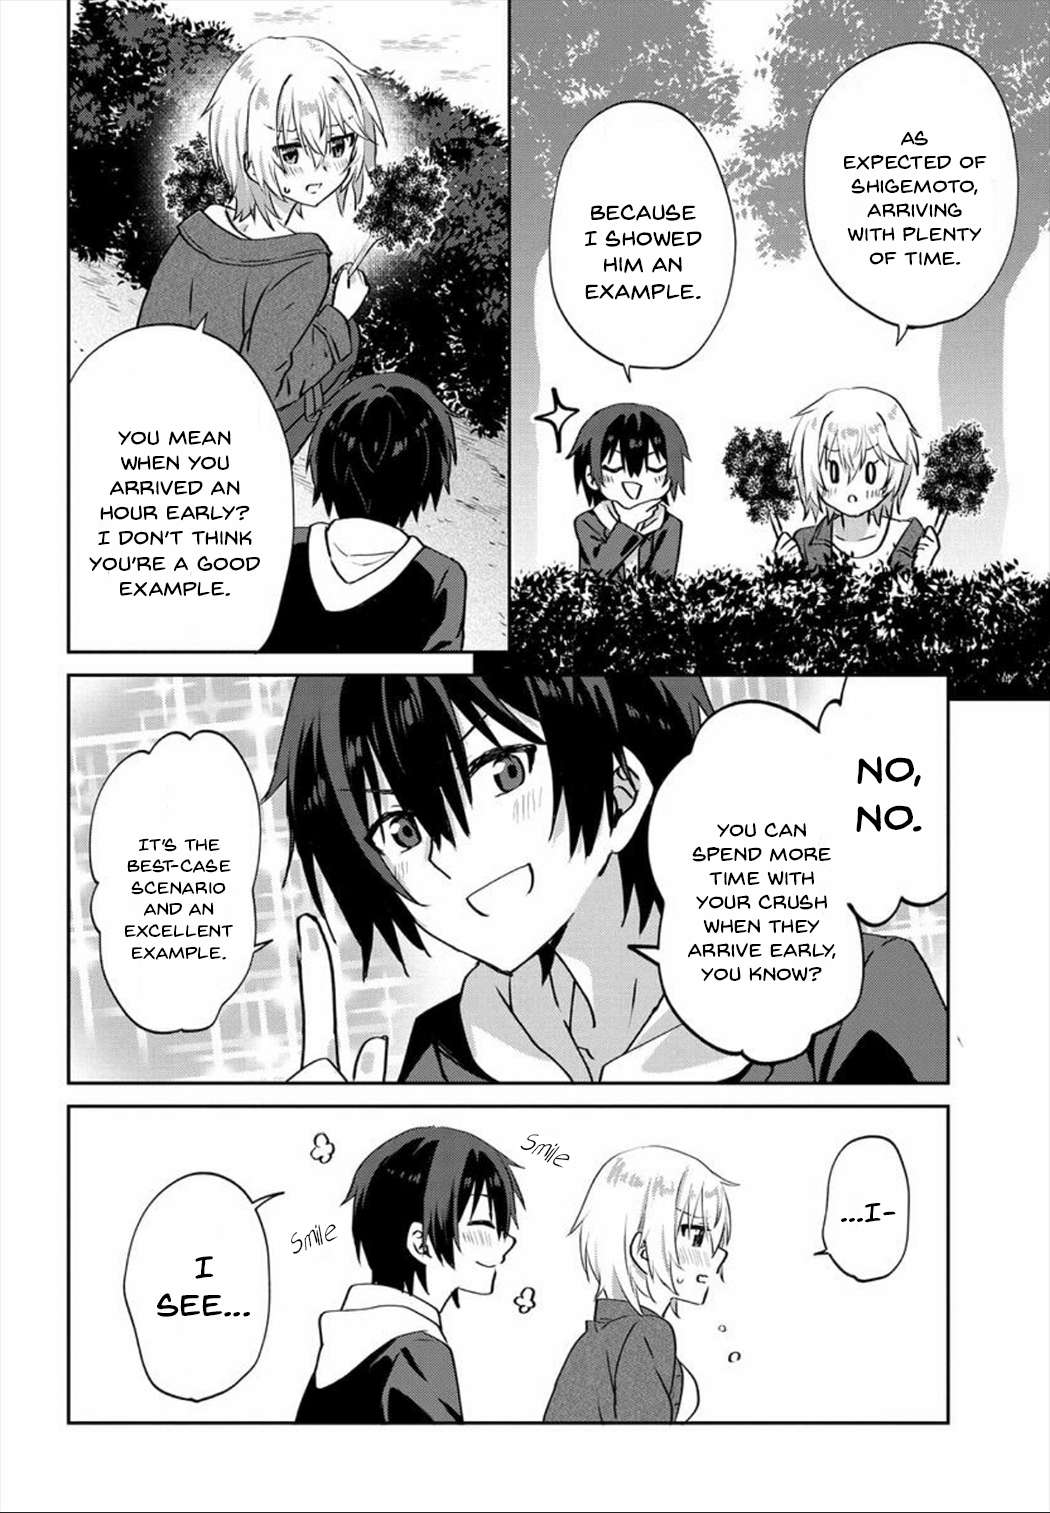 Since I’Ve Entered The World Of Romantic Comedy Manga, I’Ll Do My Best To Make The Losing Heroine Happy - chapter 6.2 - #5